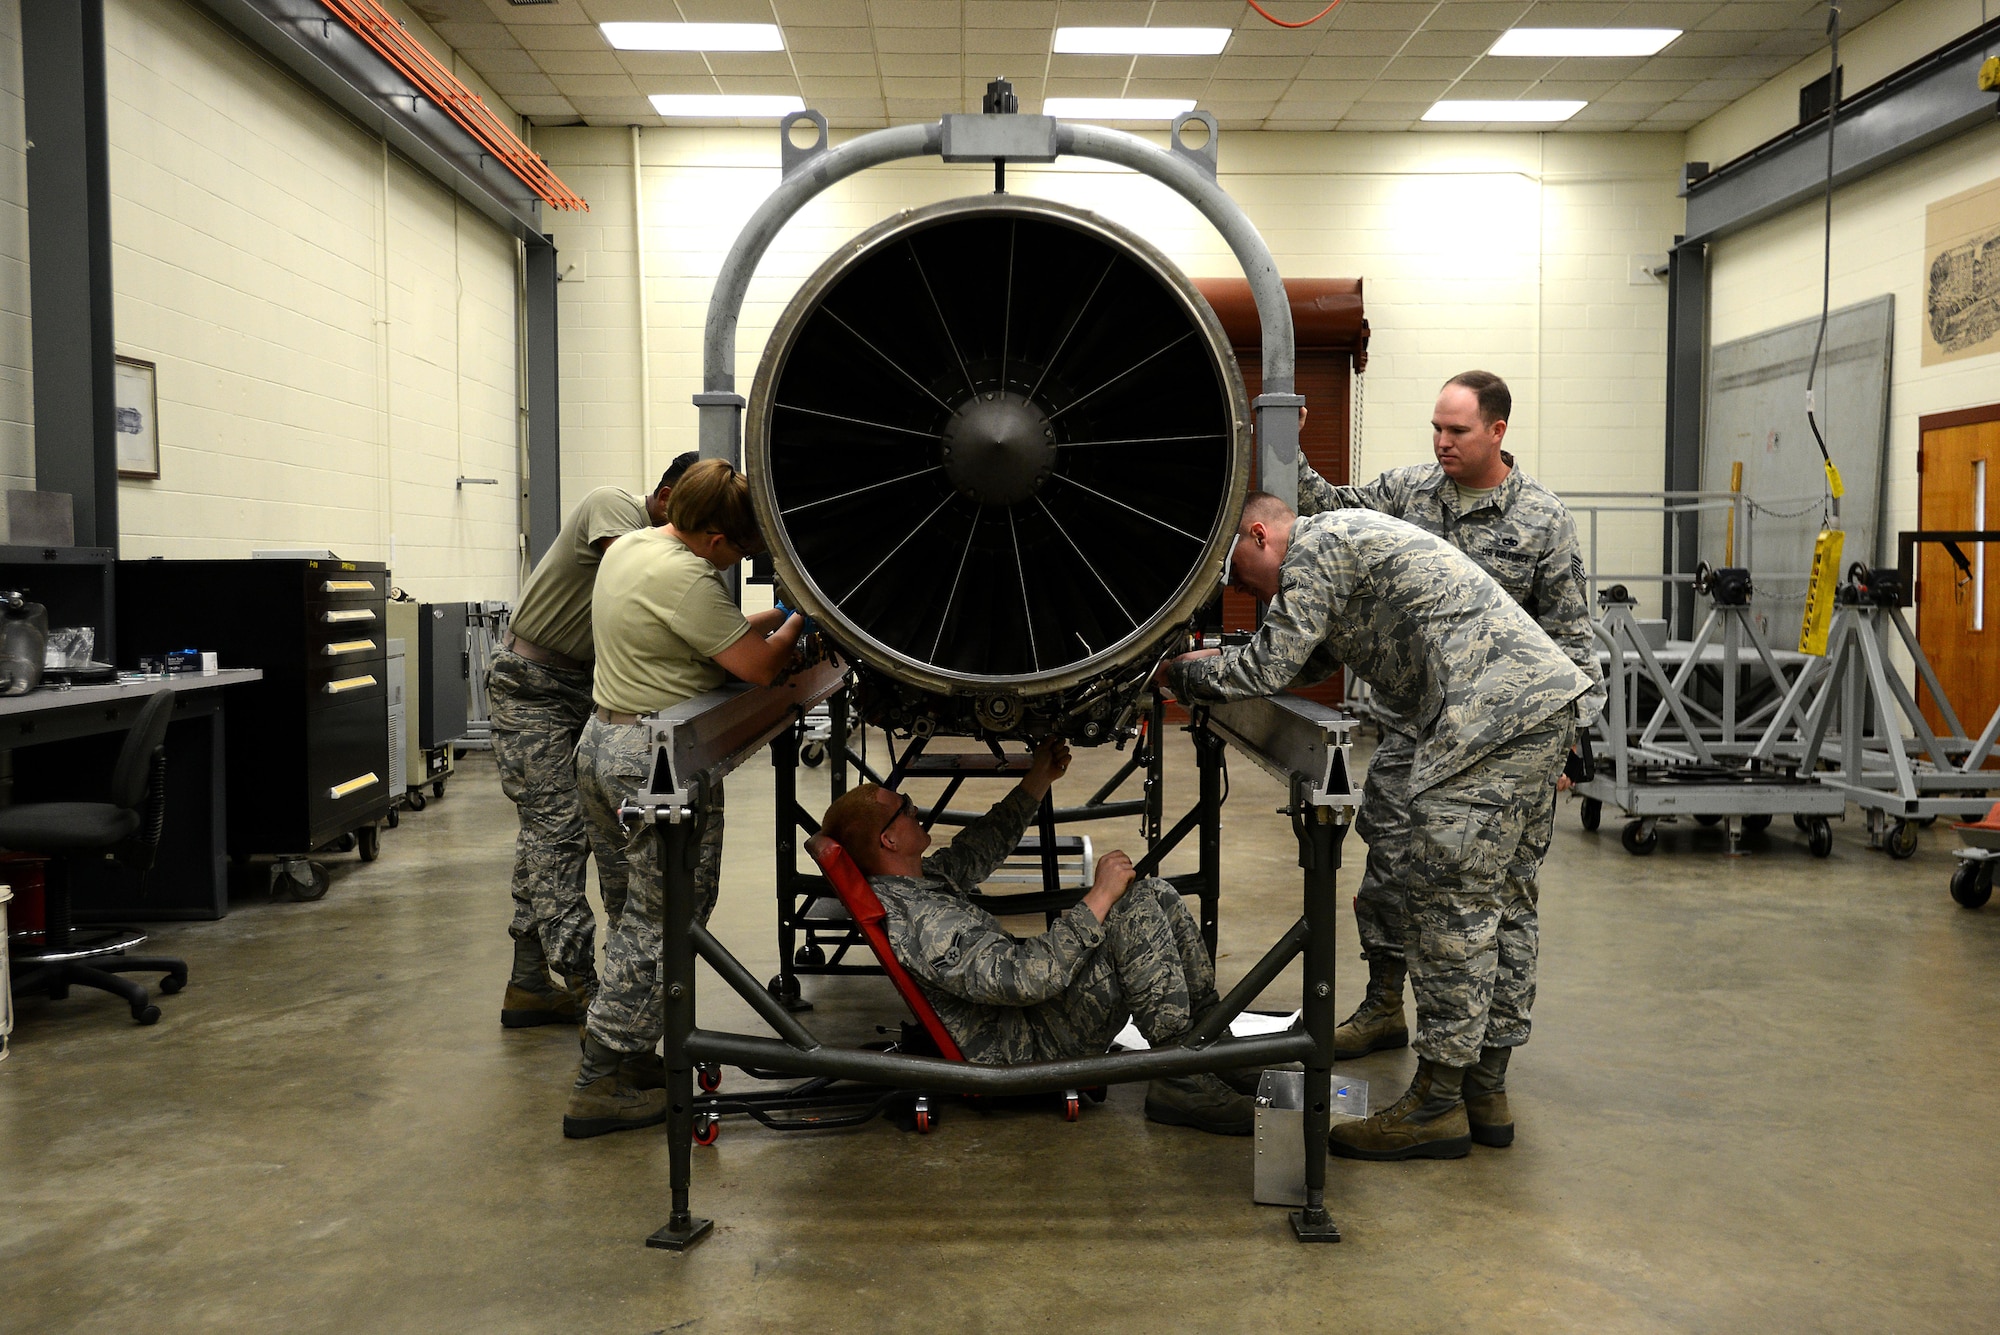 A team of four U.S. Airmen, overseen by their instructor, work together to remove the accessory drive gearbox from an F-16CM Fighting Falcon engine during training at the 372nd Training Squadron, Detachment 202 F-16 Field Training Detachment (FTD) at Shaw Air Force Base, S.C., April 25, 2017. The FTD is responsible for training not only active duty maintenance Airmen, but also Air National Guard and Air Force Reserve Airmen, and those preparing for a permanent change of station to the Pacific Air Forces area of responsibility. (U.S. Air Force photo by Senior Airman Kelsey Tucker)